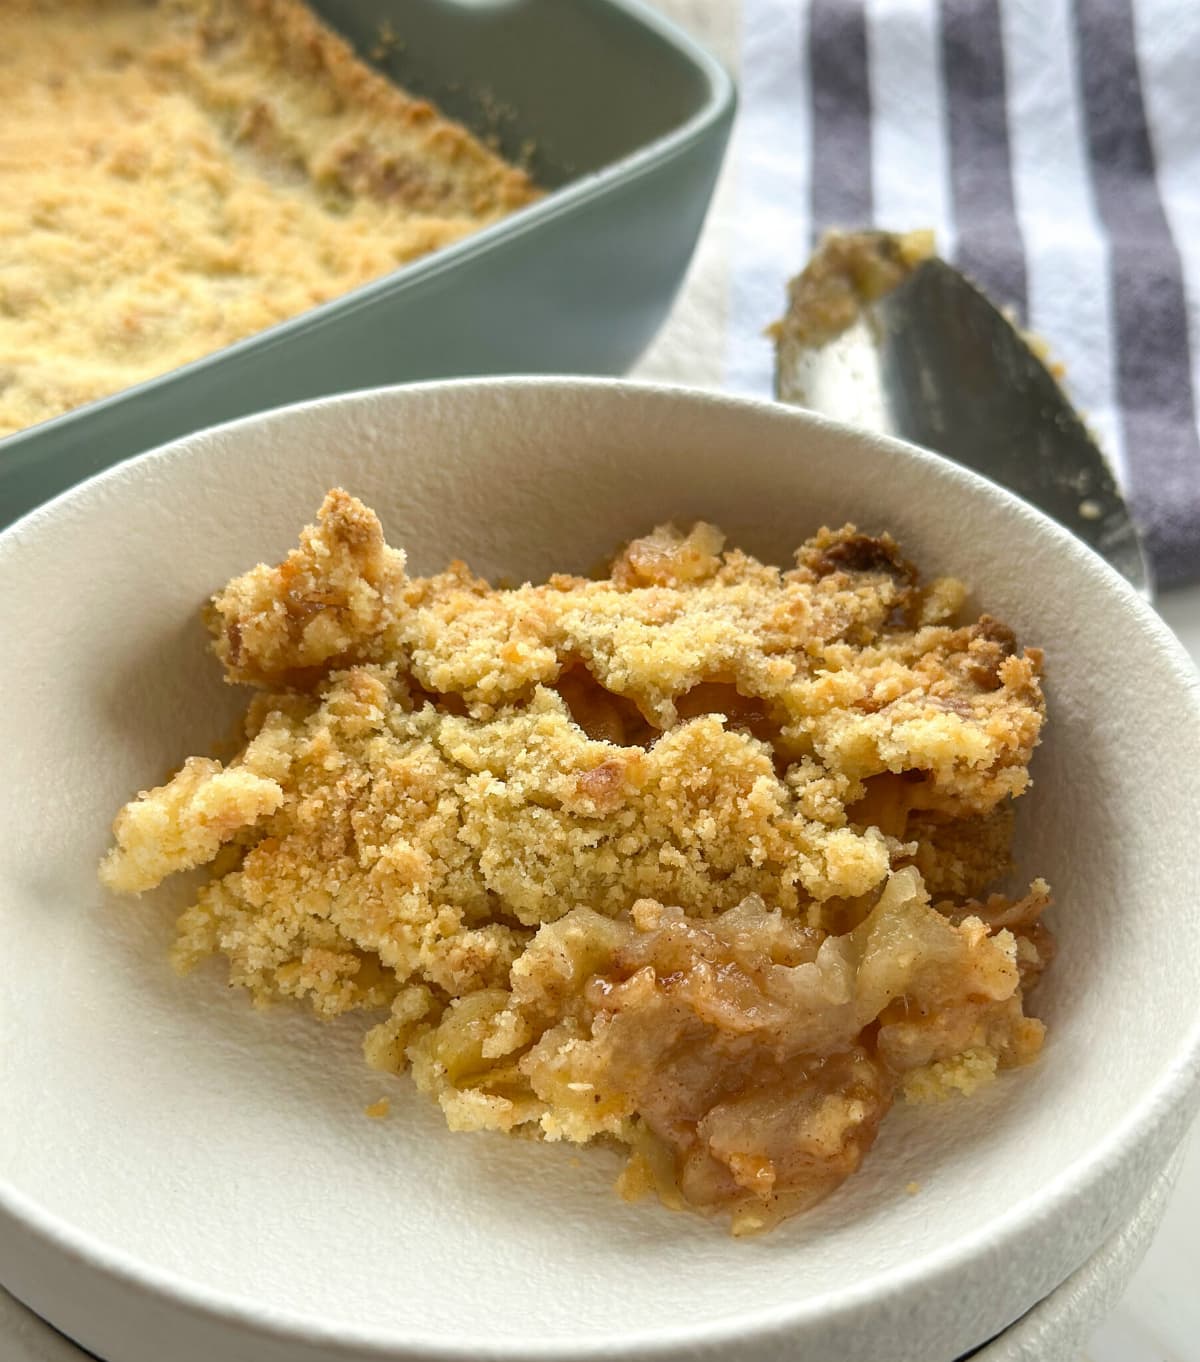 Serving of basic classic apple crumble with apple coated in cinnamon and sugar and a crumble topping